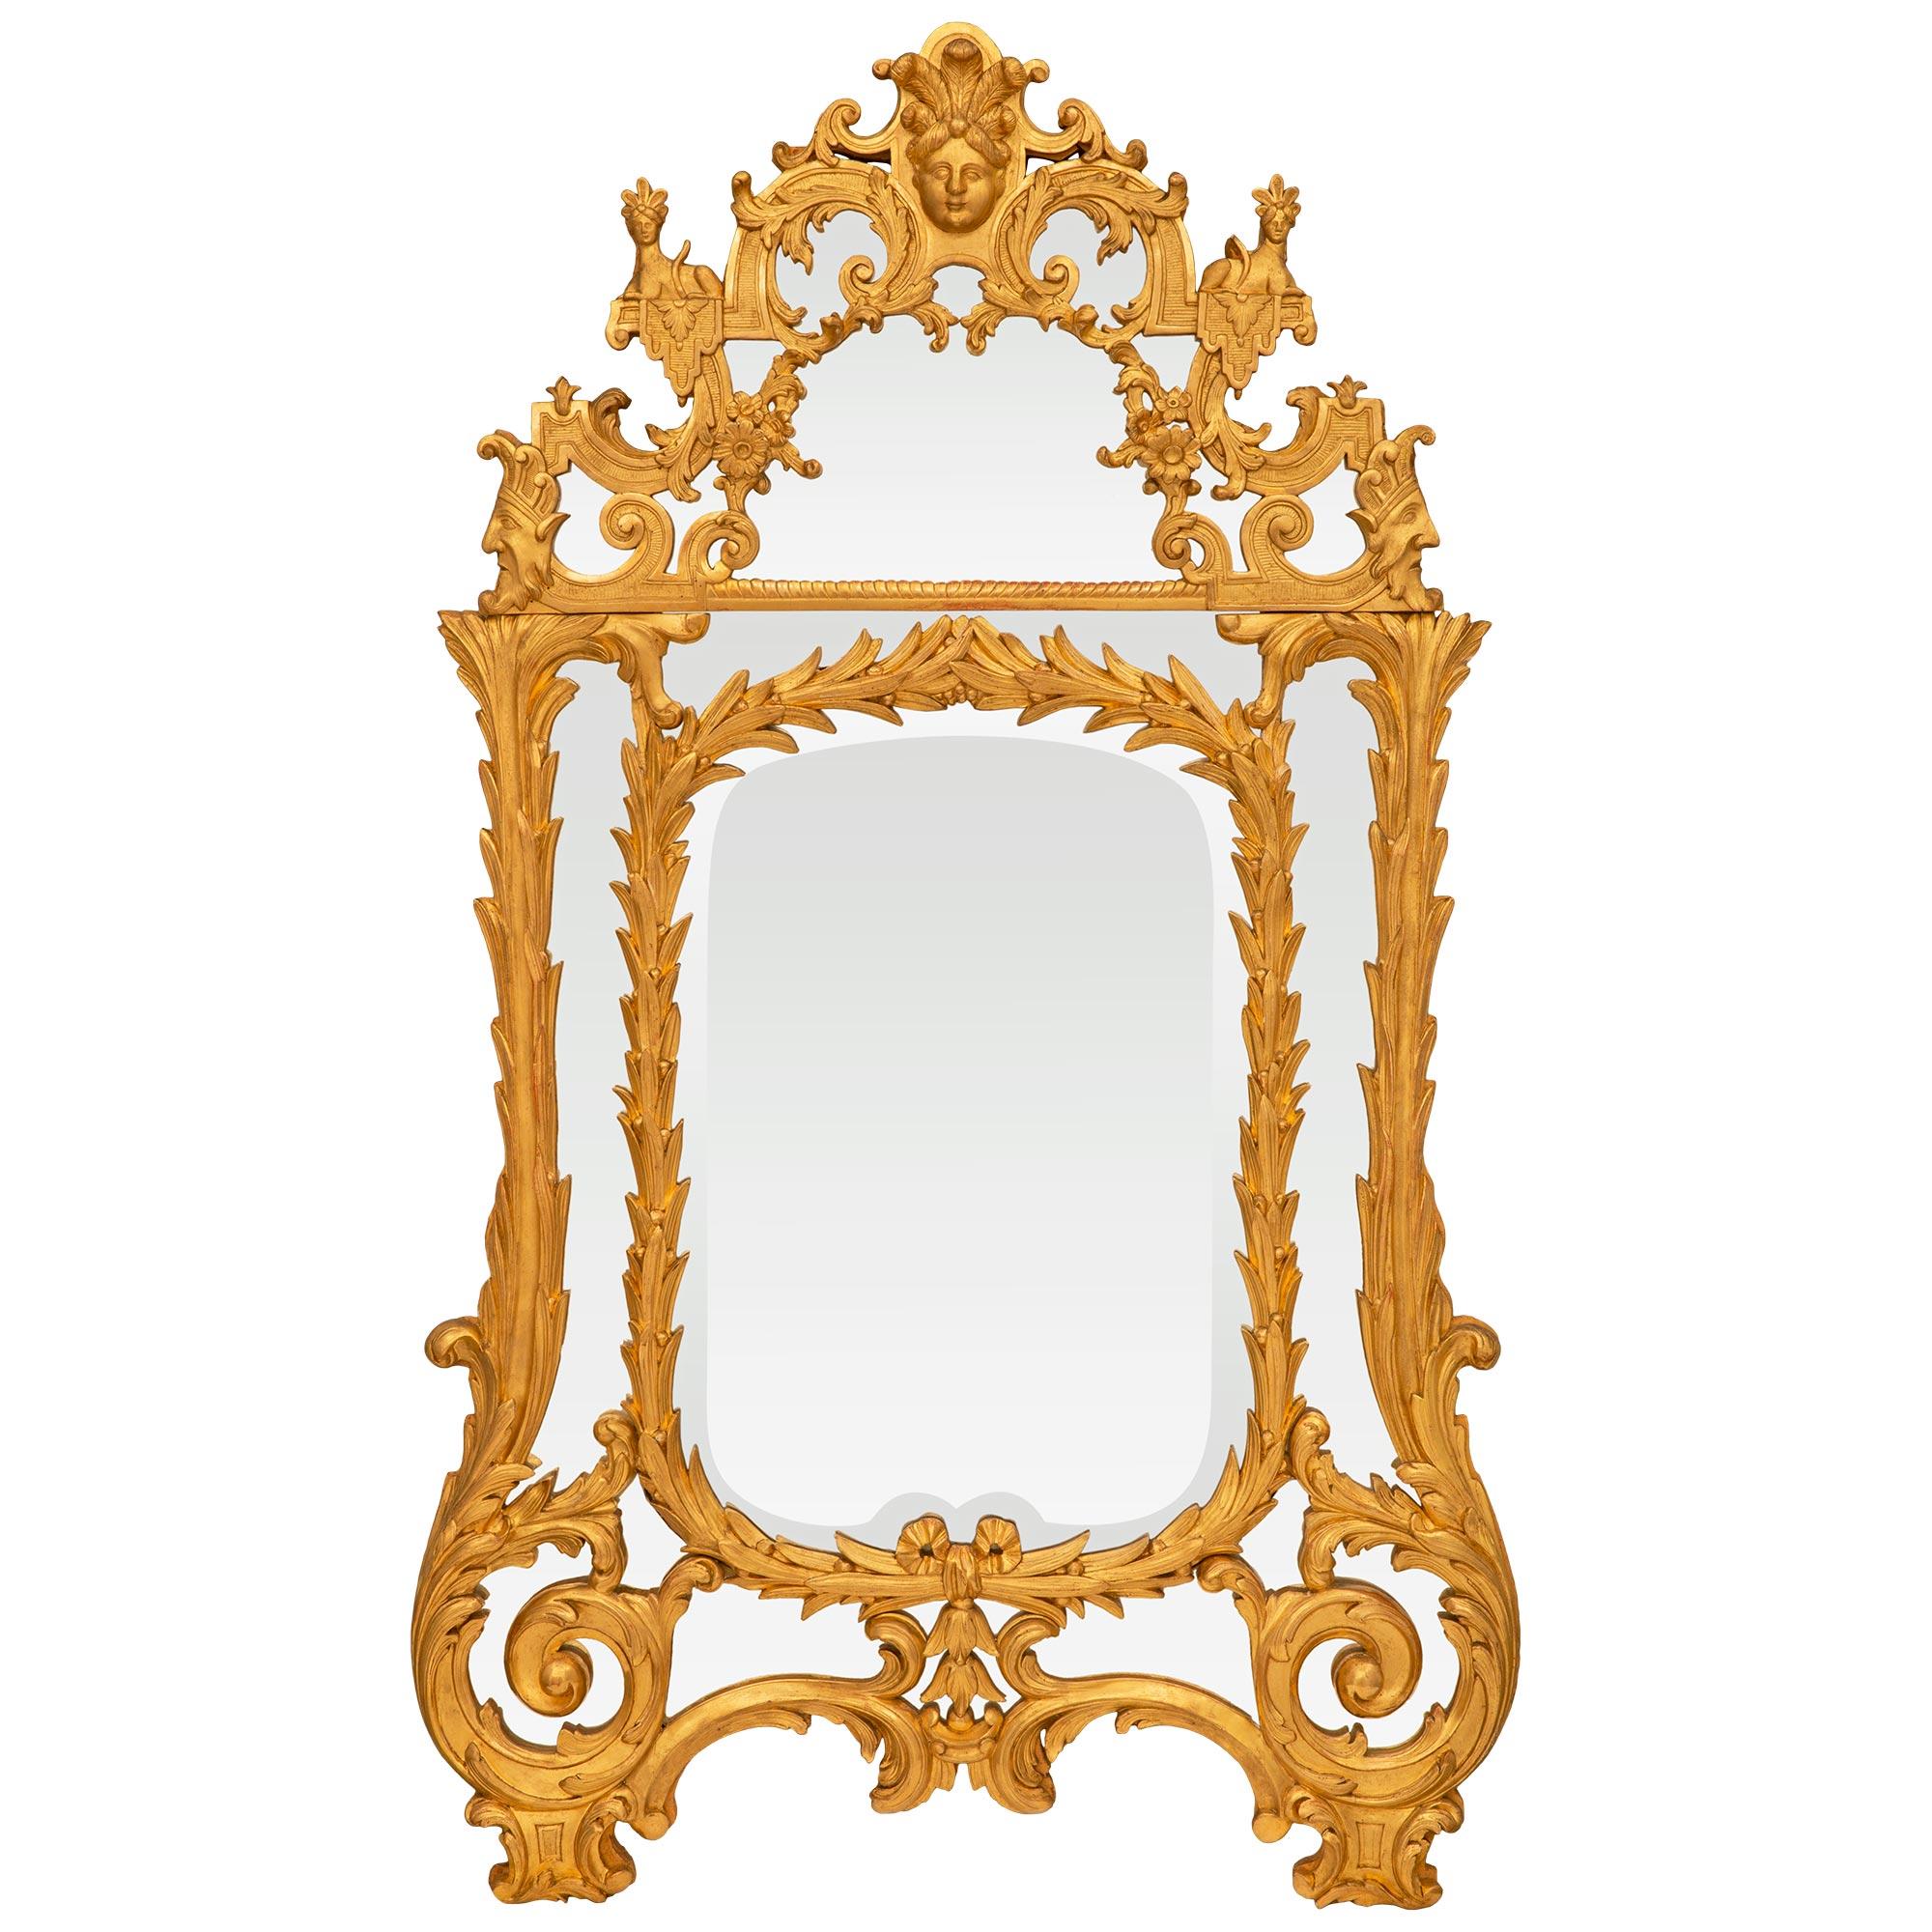 French Early 18th Century Regence Period Giltwood Mirror For Sale 4